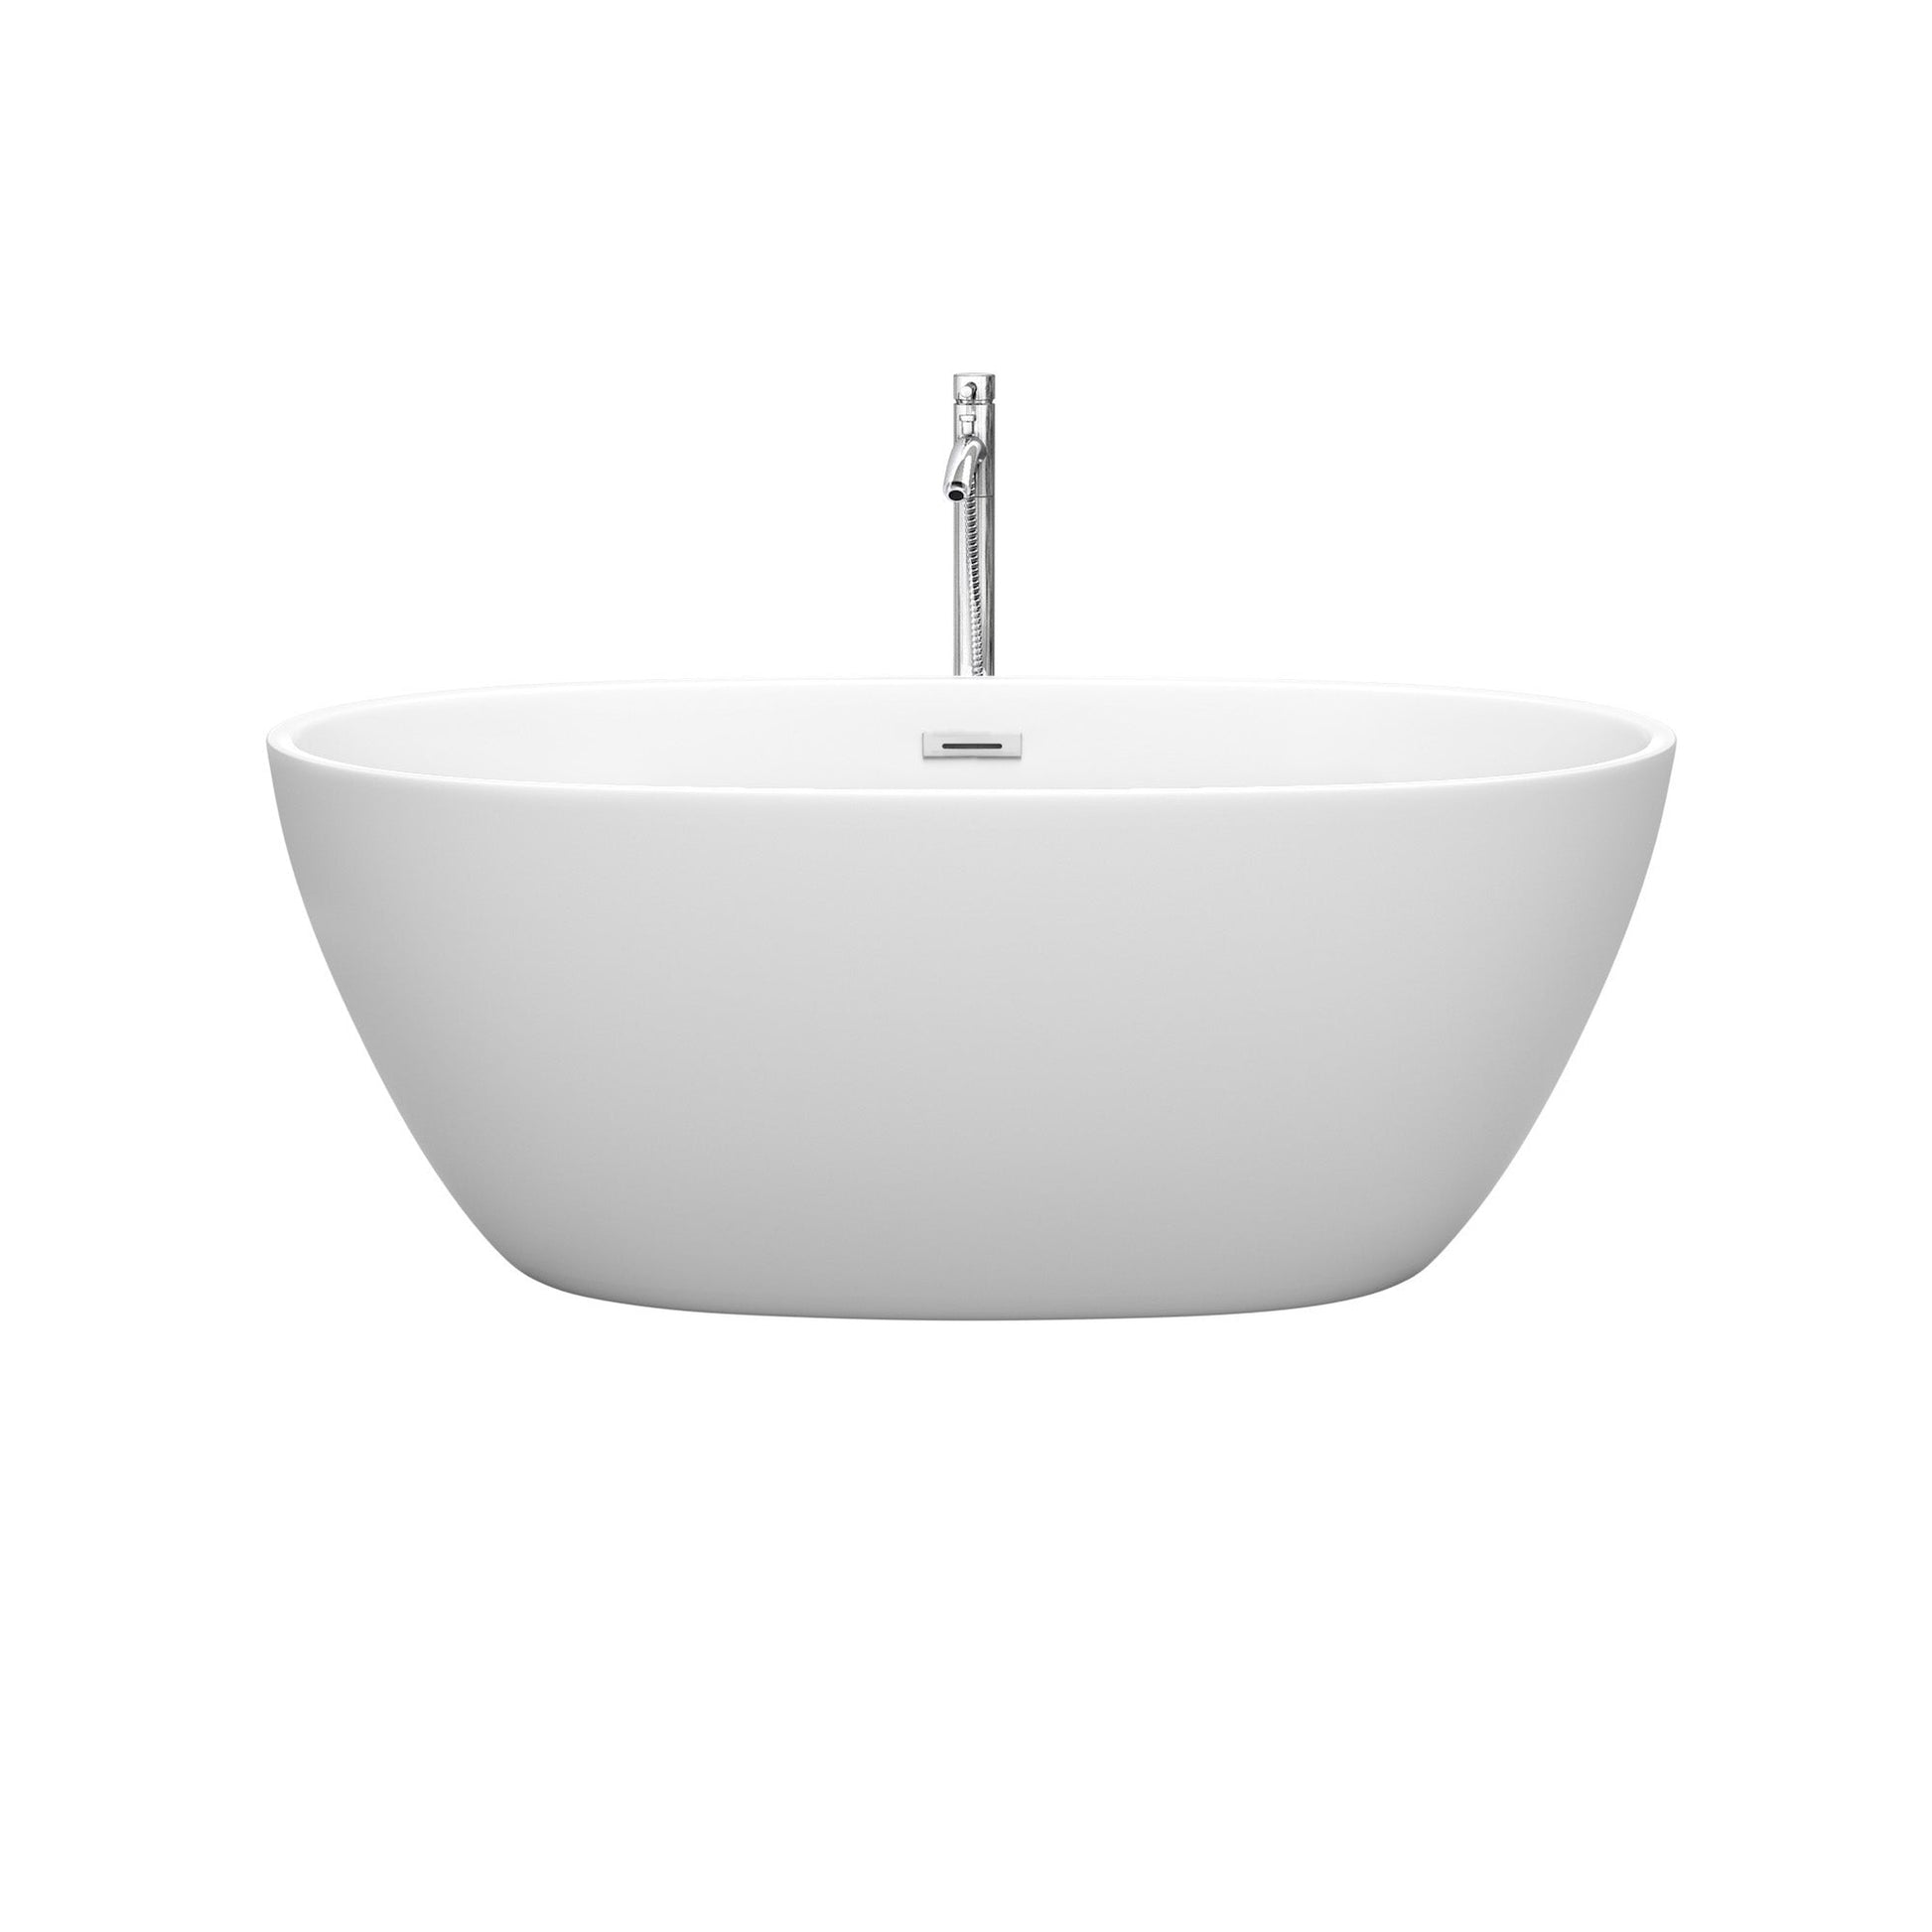 Wyndham Collection Juno 59" Freestanding Bathtub in Matte White With Floor Mounted Faucet, Drain and Overflow Trim in Polished Chrome